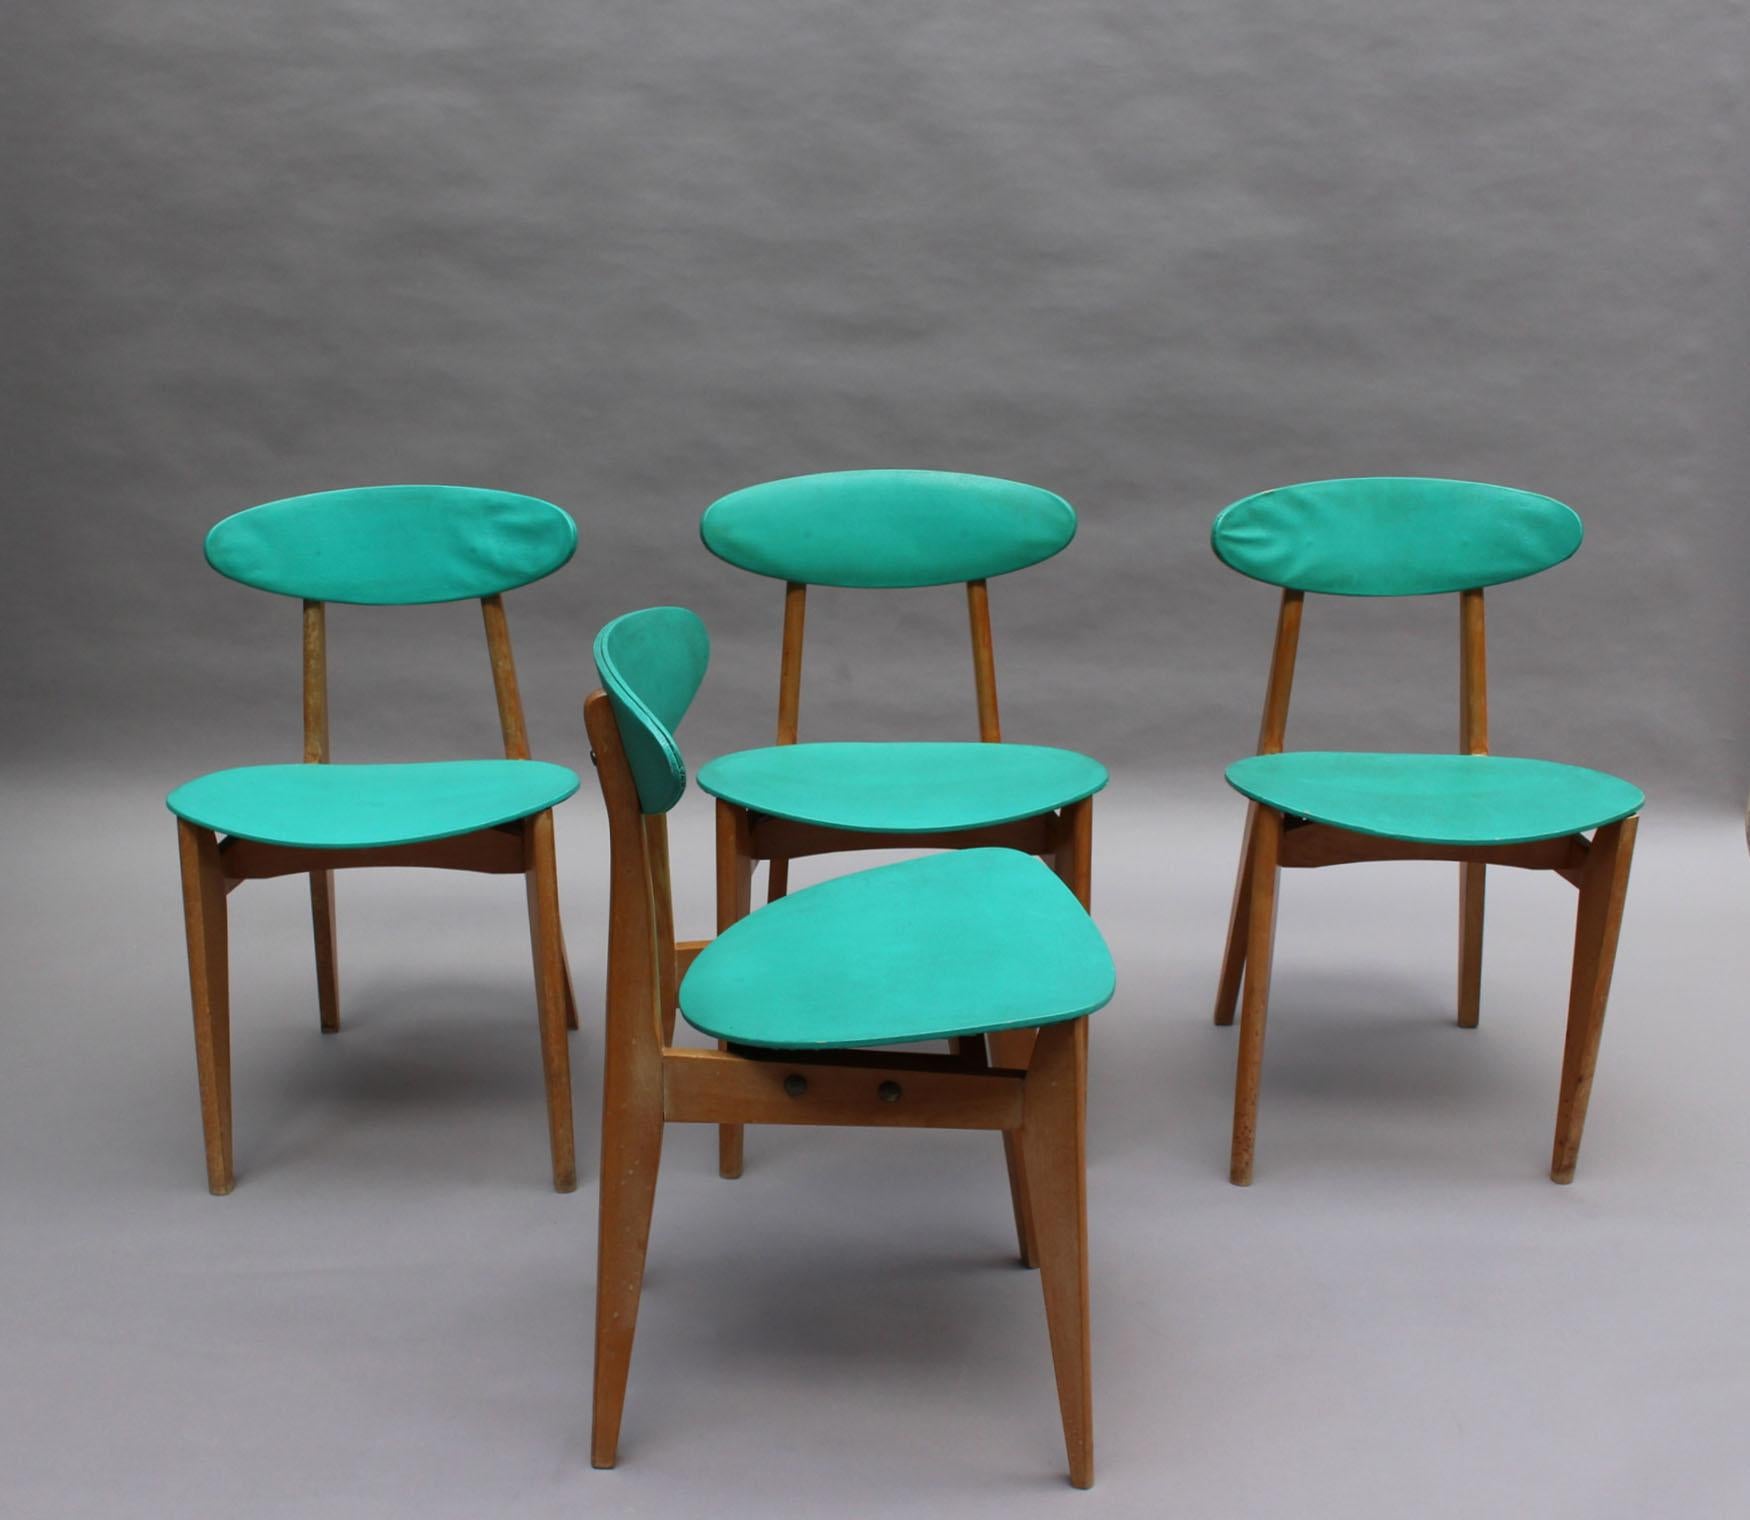 Set of four French Mid-Century beech dining chairs designed by Roger Landault and edited by Robert Sentou.